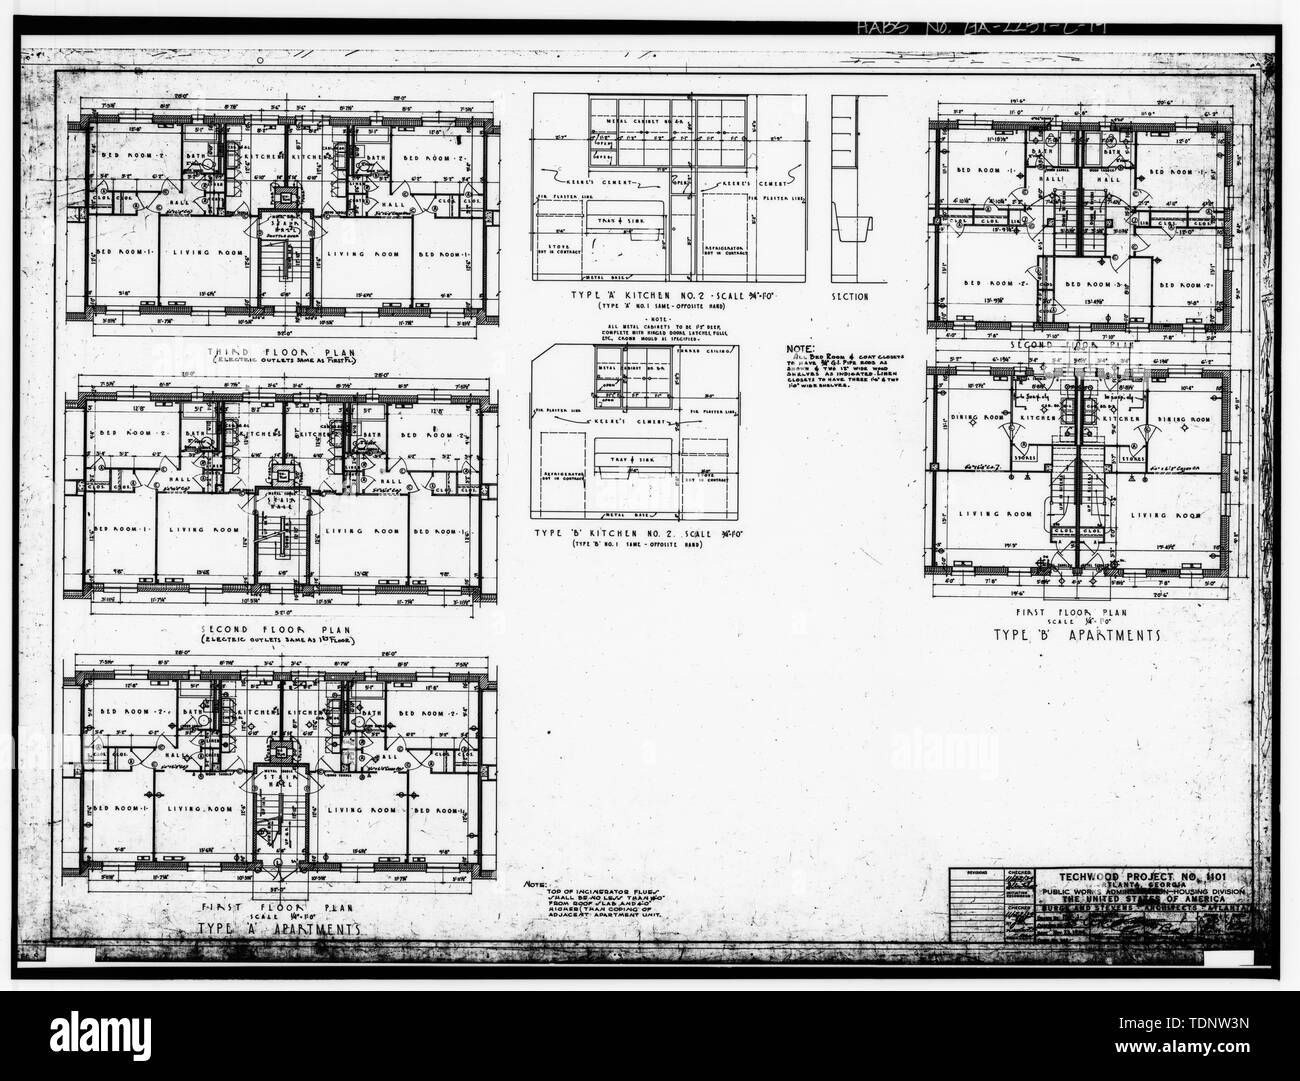 Photocopy of Drawing (November 1934 Architectural Drawings by Burge and Stevens, in Possession of the Engineering and Capital Improvements Department of the Atlanta Housing Authority, Atlanta, Georgia). FLOOR PLANS, TYPE 'A' APARTMENTS, FLOOR PLANS, TYPE 'B' APARTMENTS, KITCHEN ELEVATIONS, TECHWOOD PROJECT -1101, SHEET A-52. - Techwood Homes, Building No. 1, 575-579 Techwood Drive, Atlanta, Fulton County, GA Stock Photo